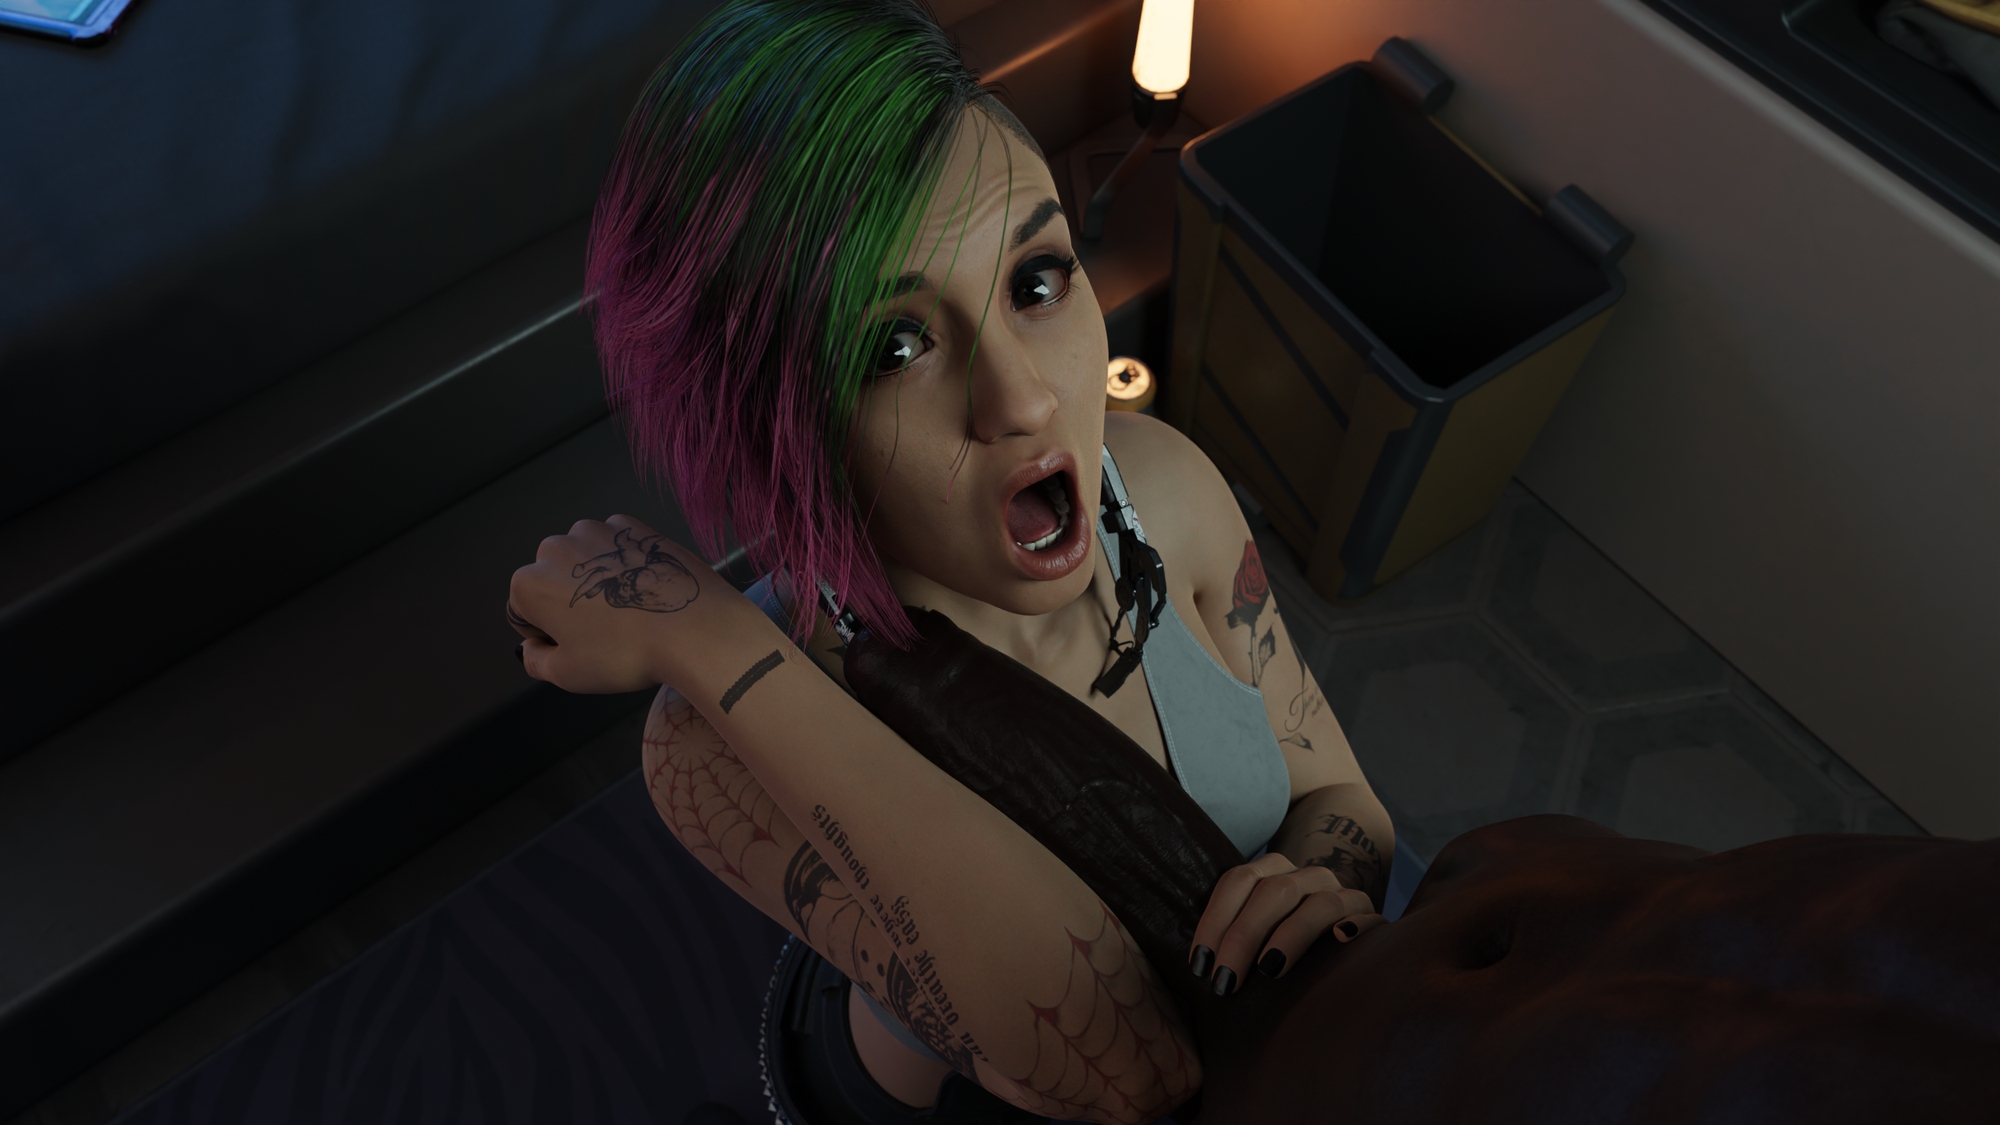 Judy Surprised By seeing this Big Black Cock Judy Alvarez Cyberpunk2077 3dnsfw Surprised Black Cock Bbc Colored Hair Small Tits Tattoo Arm Size Clothed